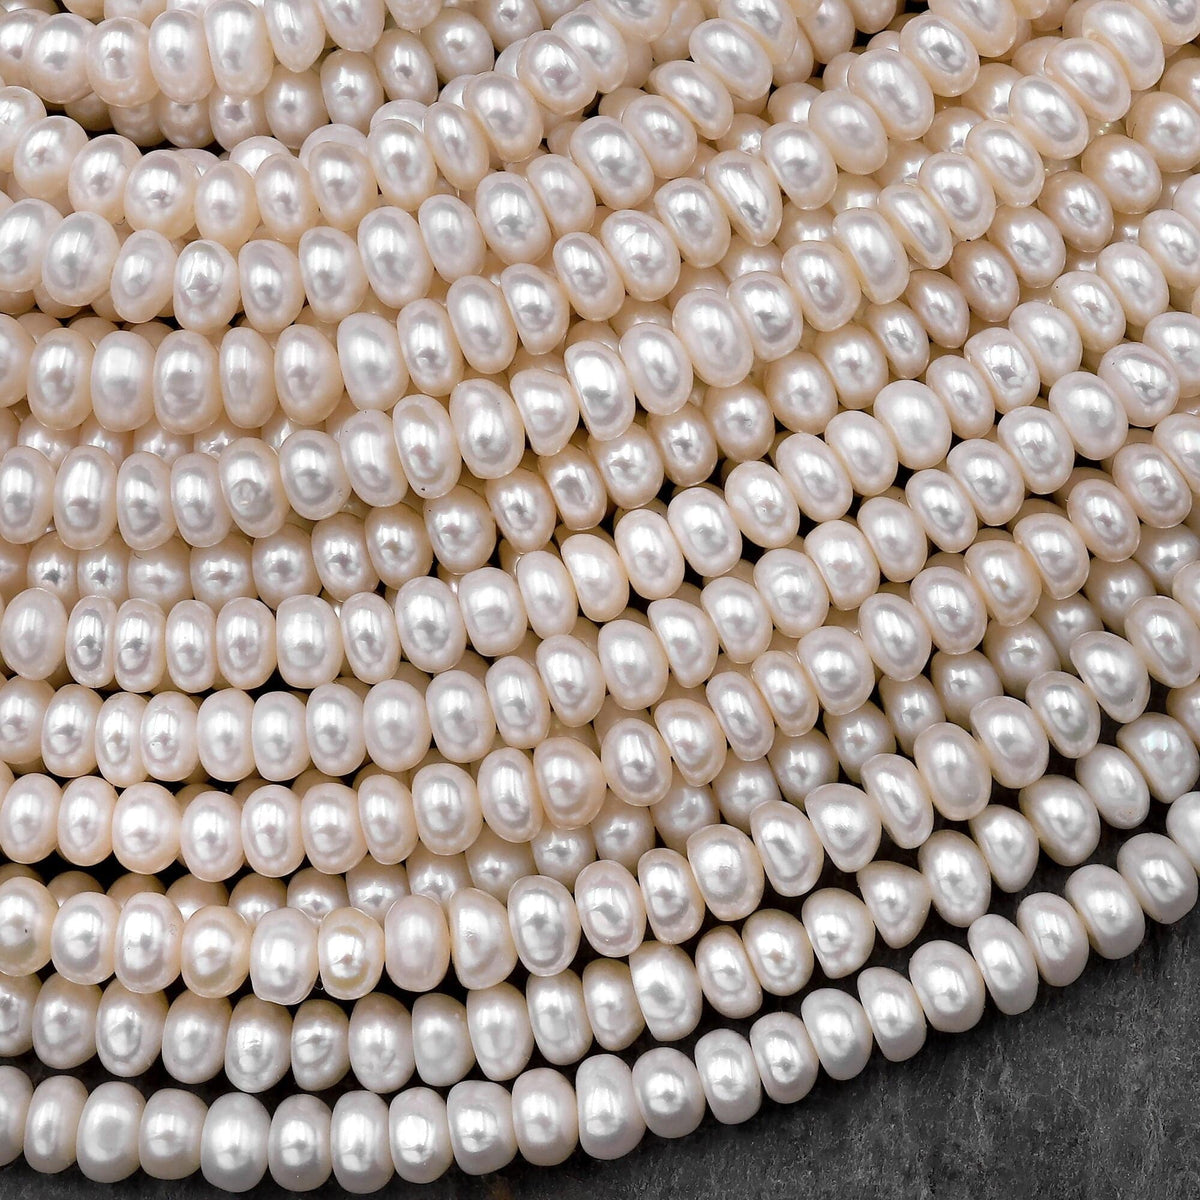 Genuine White Freshwater Pearl 4mm Rondelle Beads Shimmery Iridescent  Classic Pearl 15.5